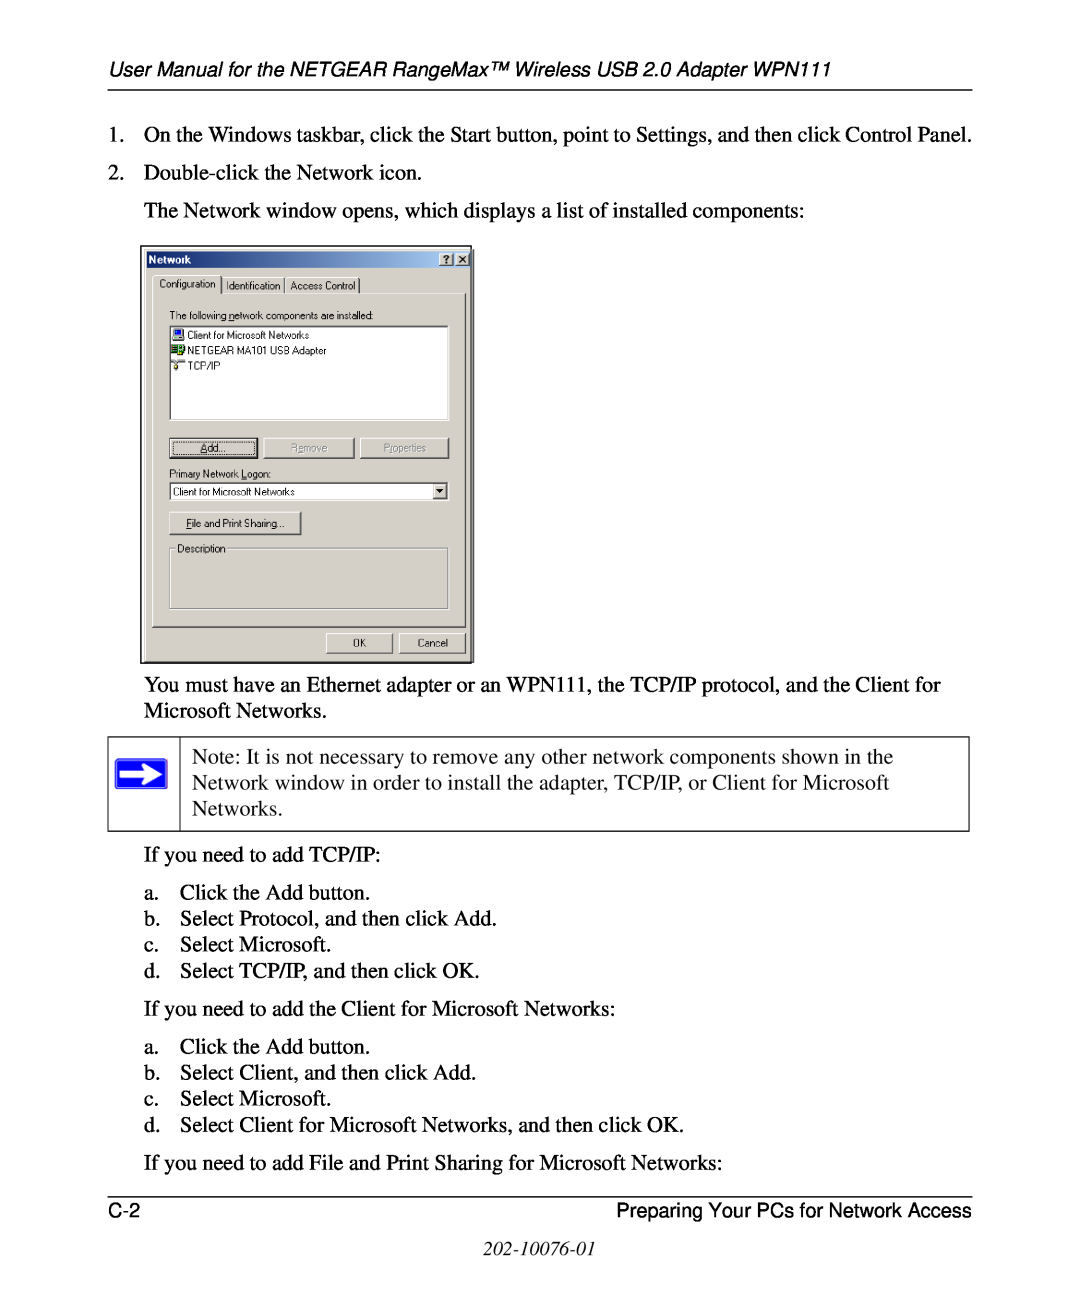 NETGEAR WPN111 user manual Double-click the Network icon 